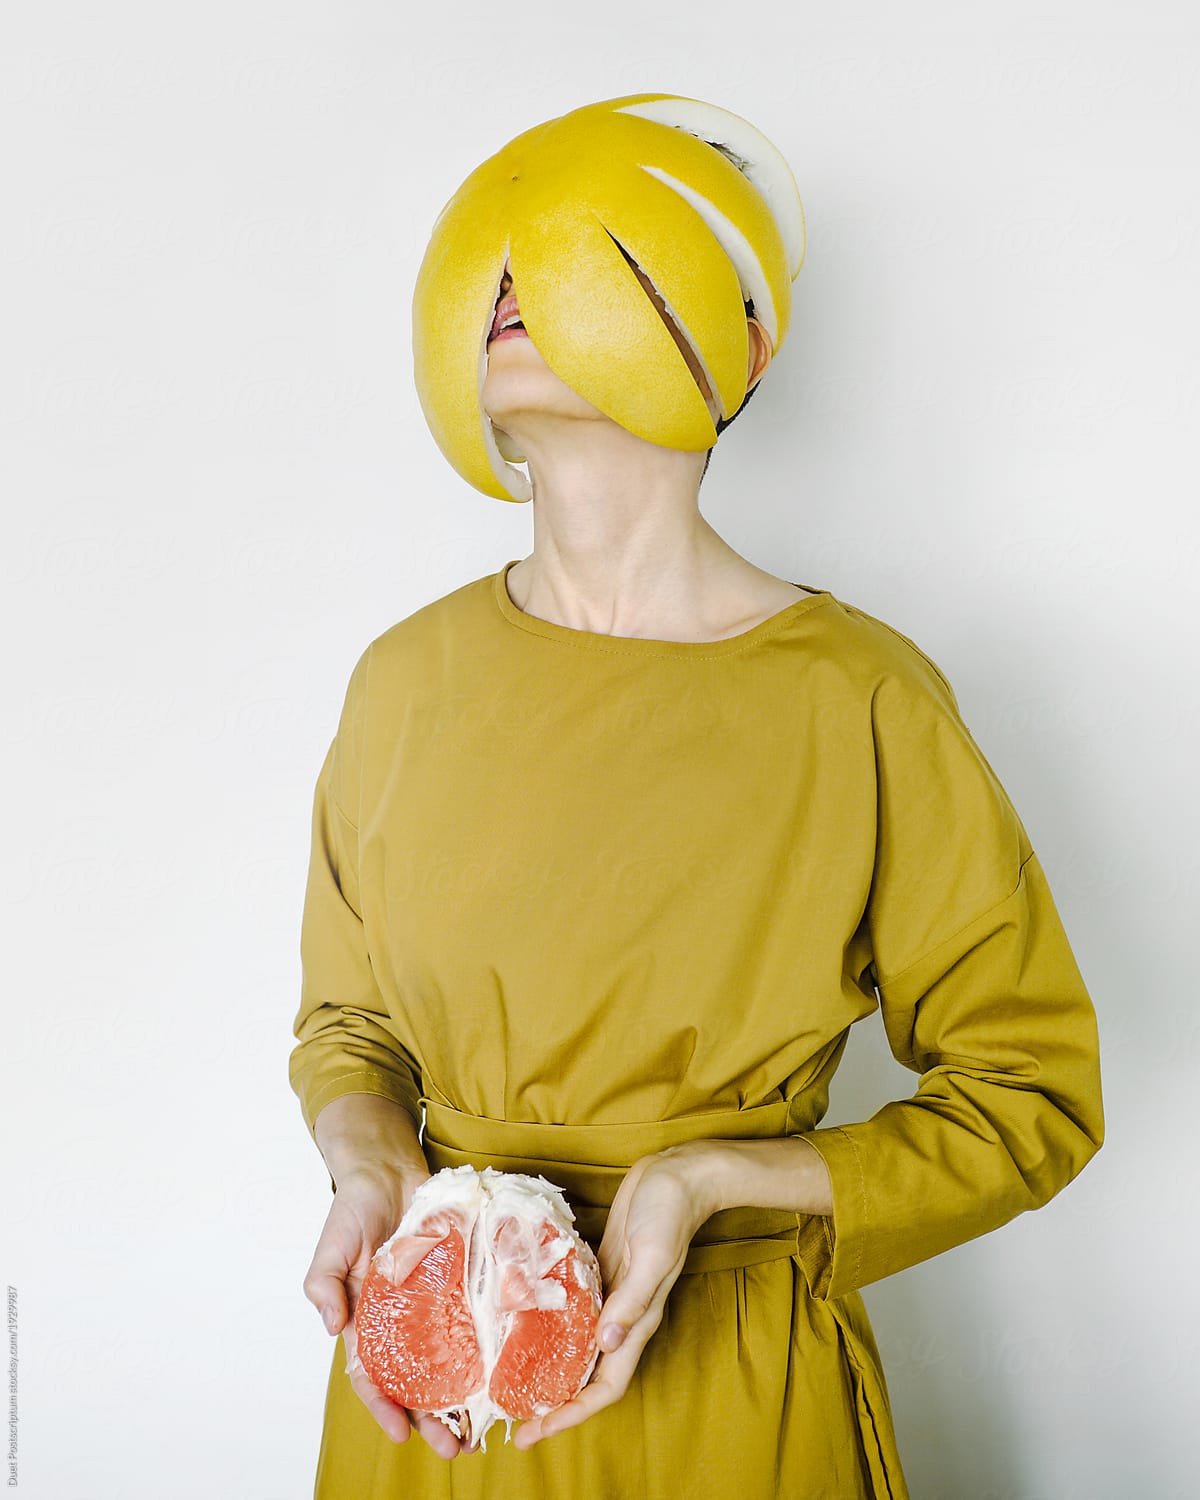 Bald Woman With Pomelo And Peel By Stocksy Contributor Duet Postscriptum Stocksy 2364